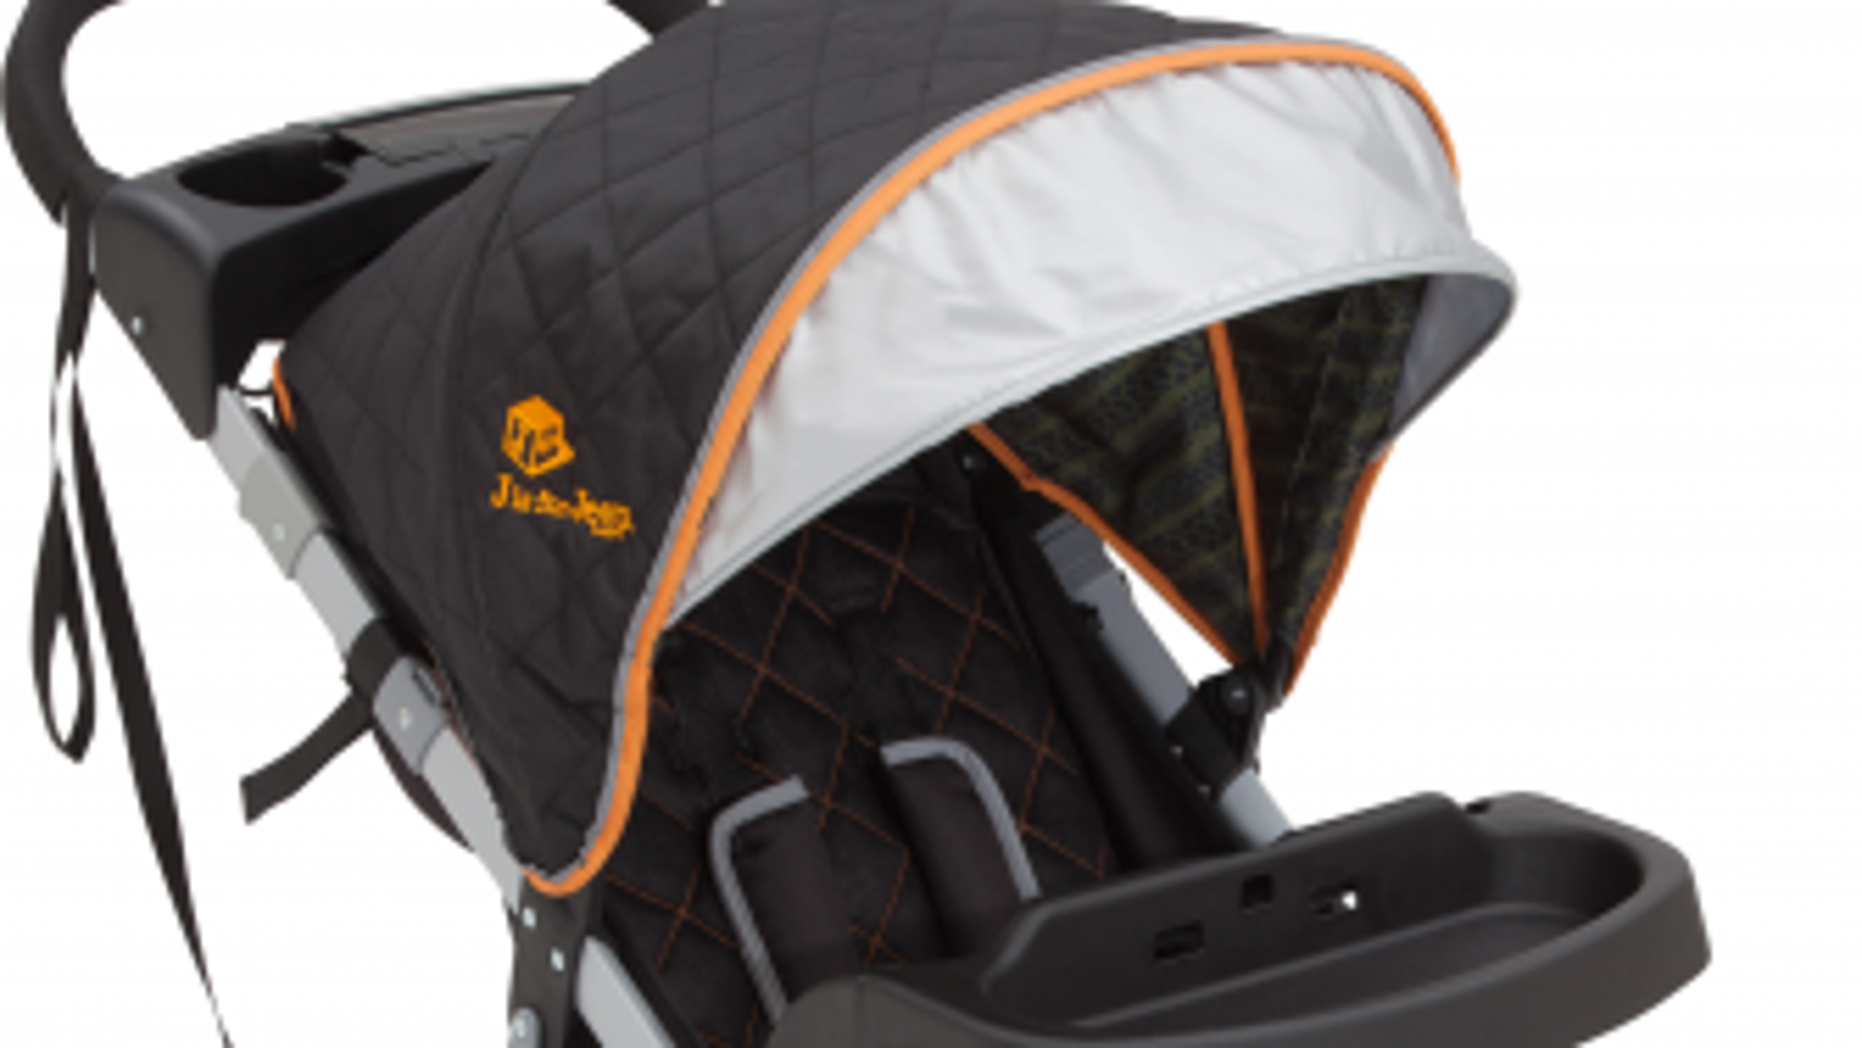 jeep overland limited jogging stroller recall